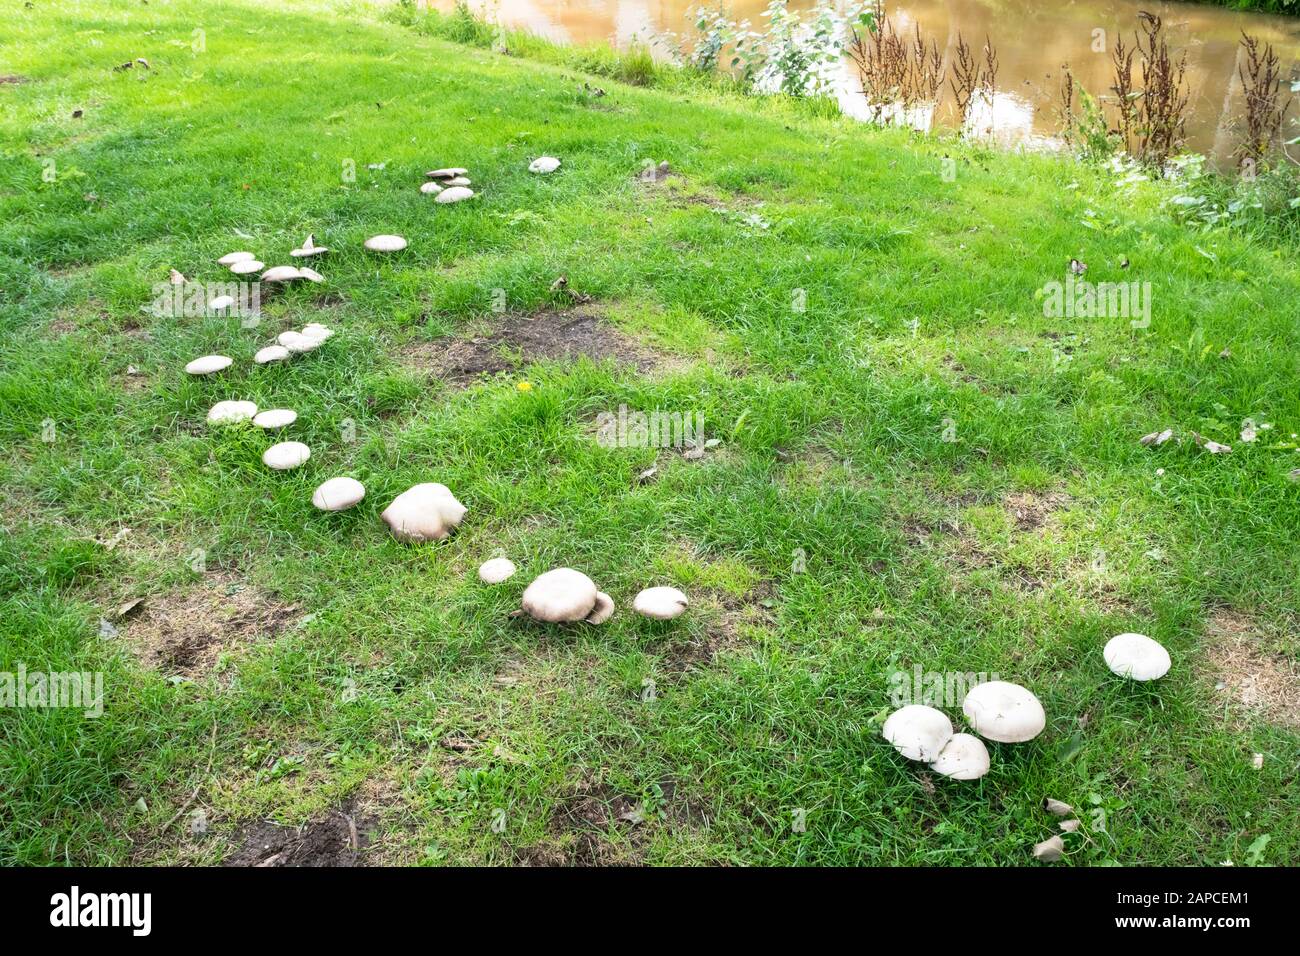 Fairy ring of white mushrooms growing on field of grass Stock Photo